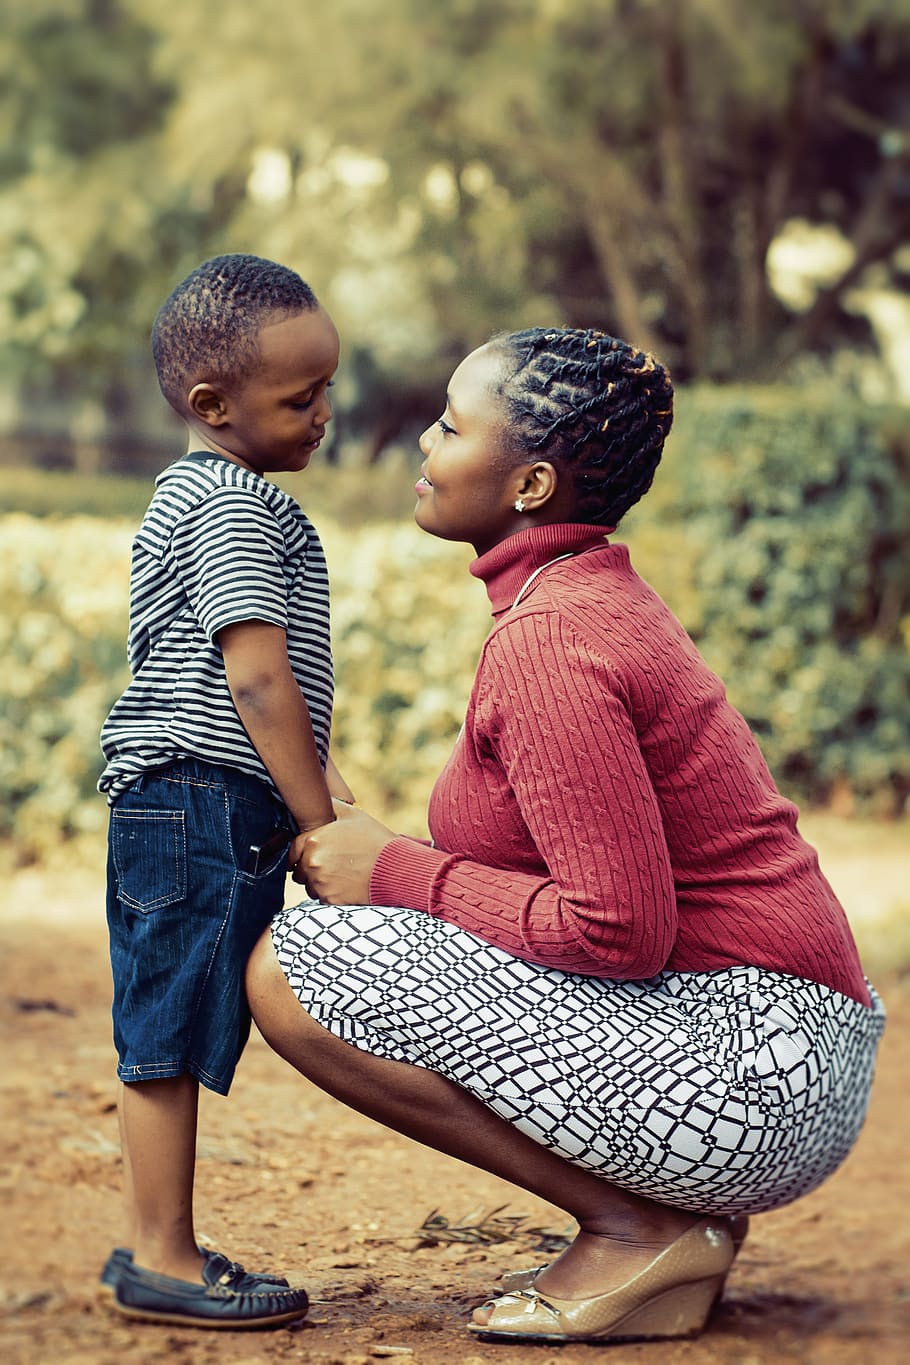 Tilt Shift Lens Photography of Woman Wearing Red Sweater and White Skirt While Holding a Boy Wearing White and Black Crew-neck Shirt and Blue Denim Short